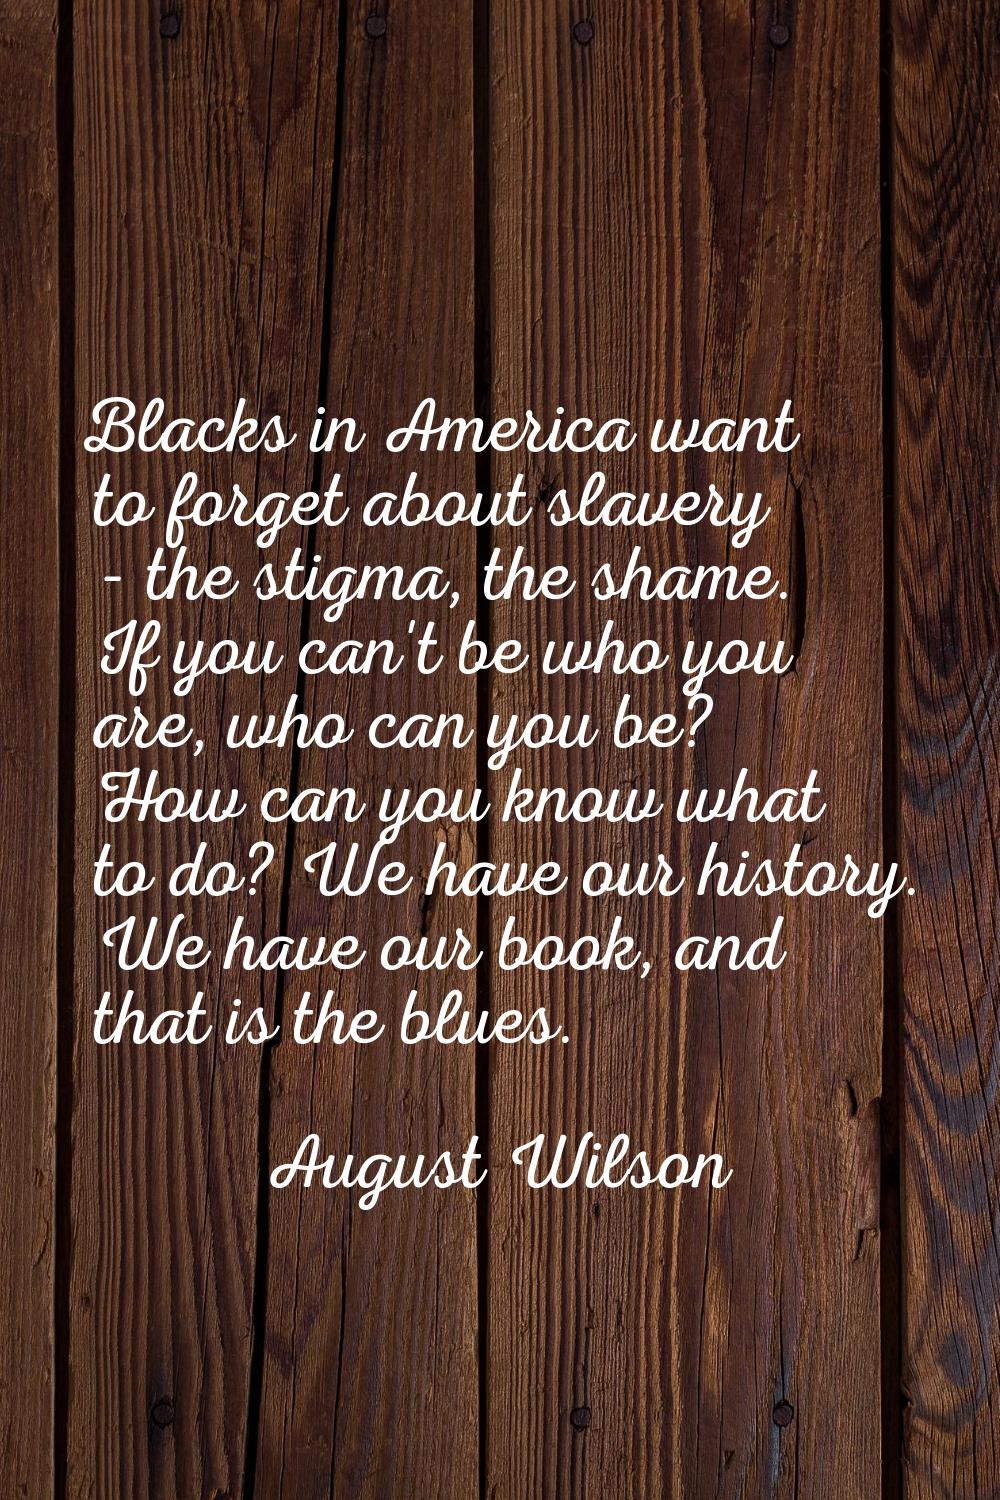 Blacks in America want to forget about slavery - the stigma, the shame. If you can't be who you are